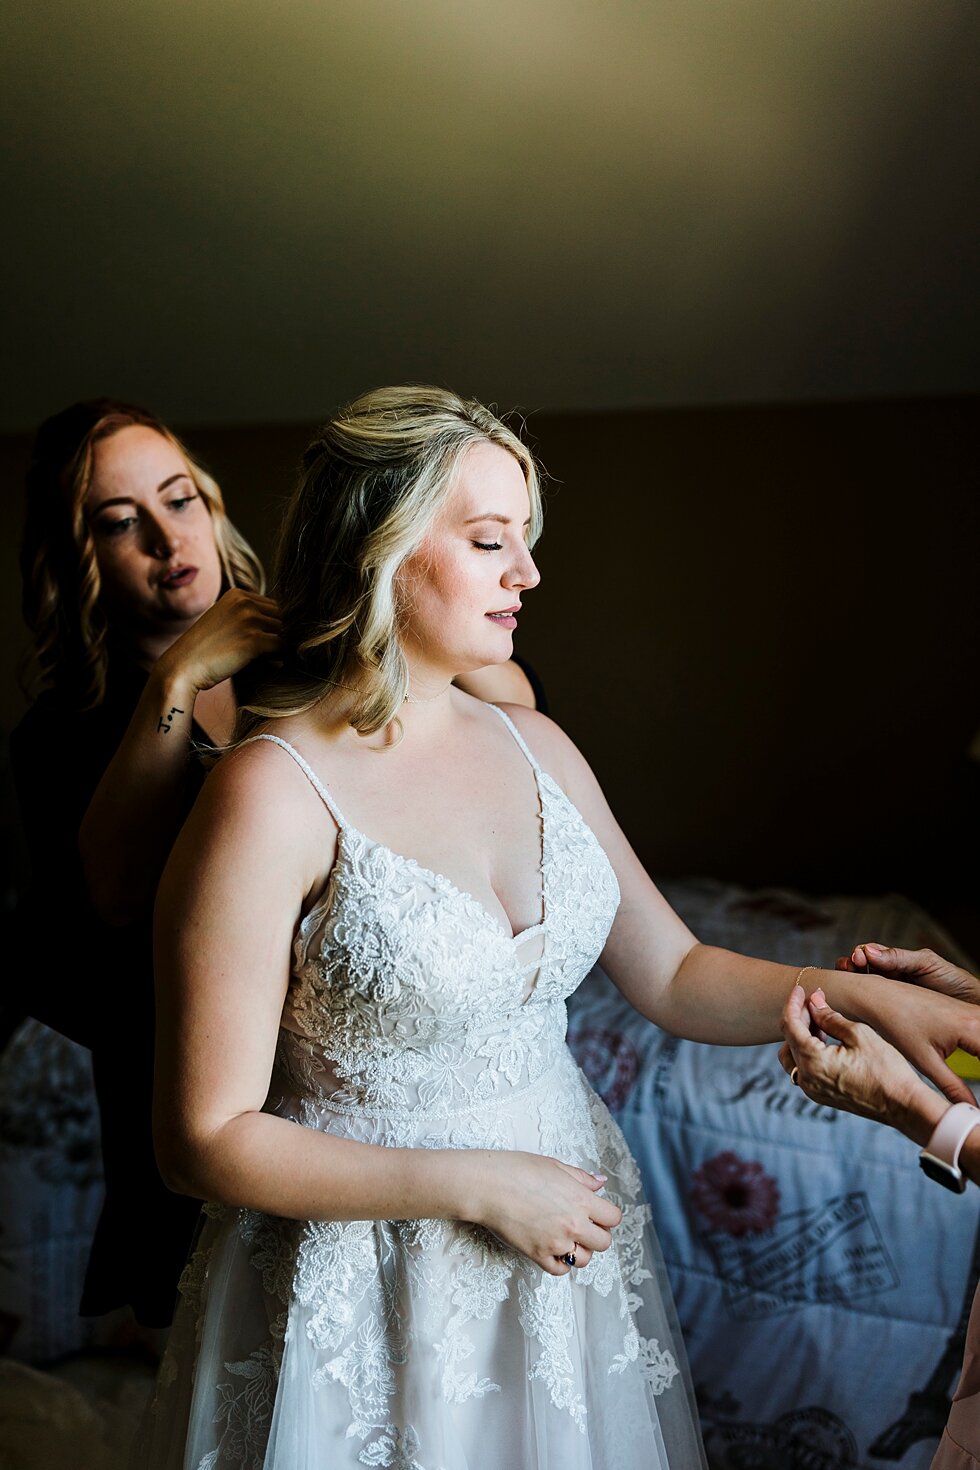  These last minute touches put the absolute cherry on the top of a beautiful ensemble for this bride! Romantic casual lace wedding gown close friends neutral colors background wedding natural greenery crisp white #midwestphotographer #kywedding #loui